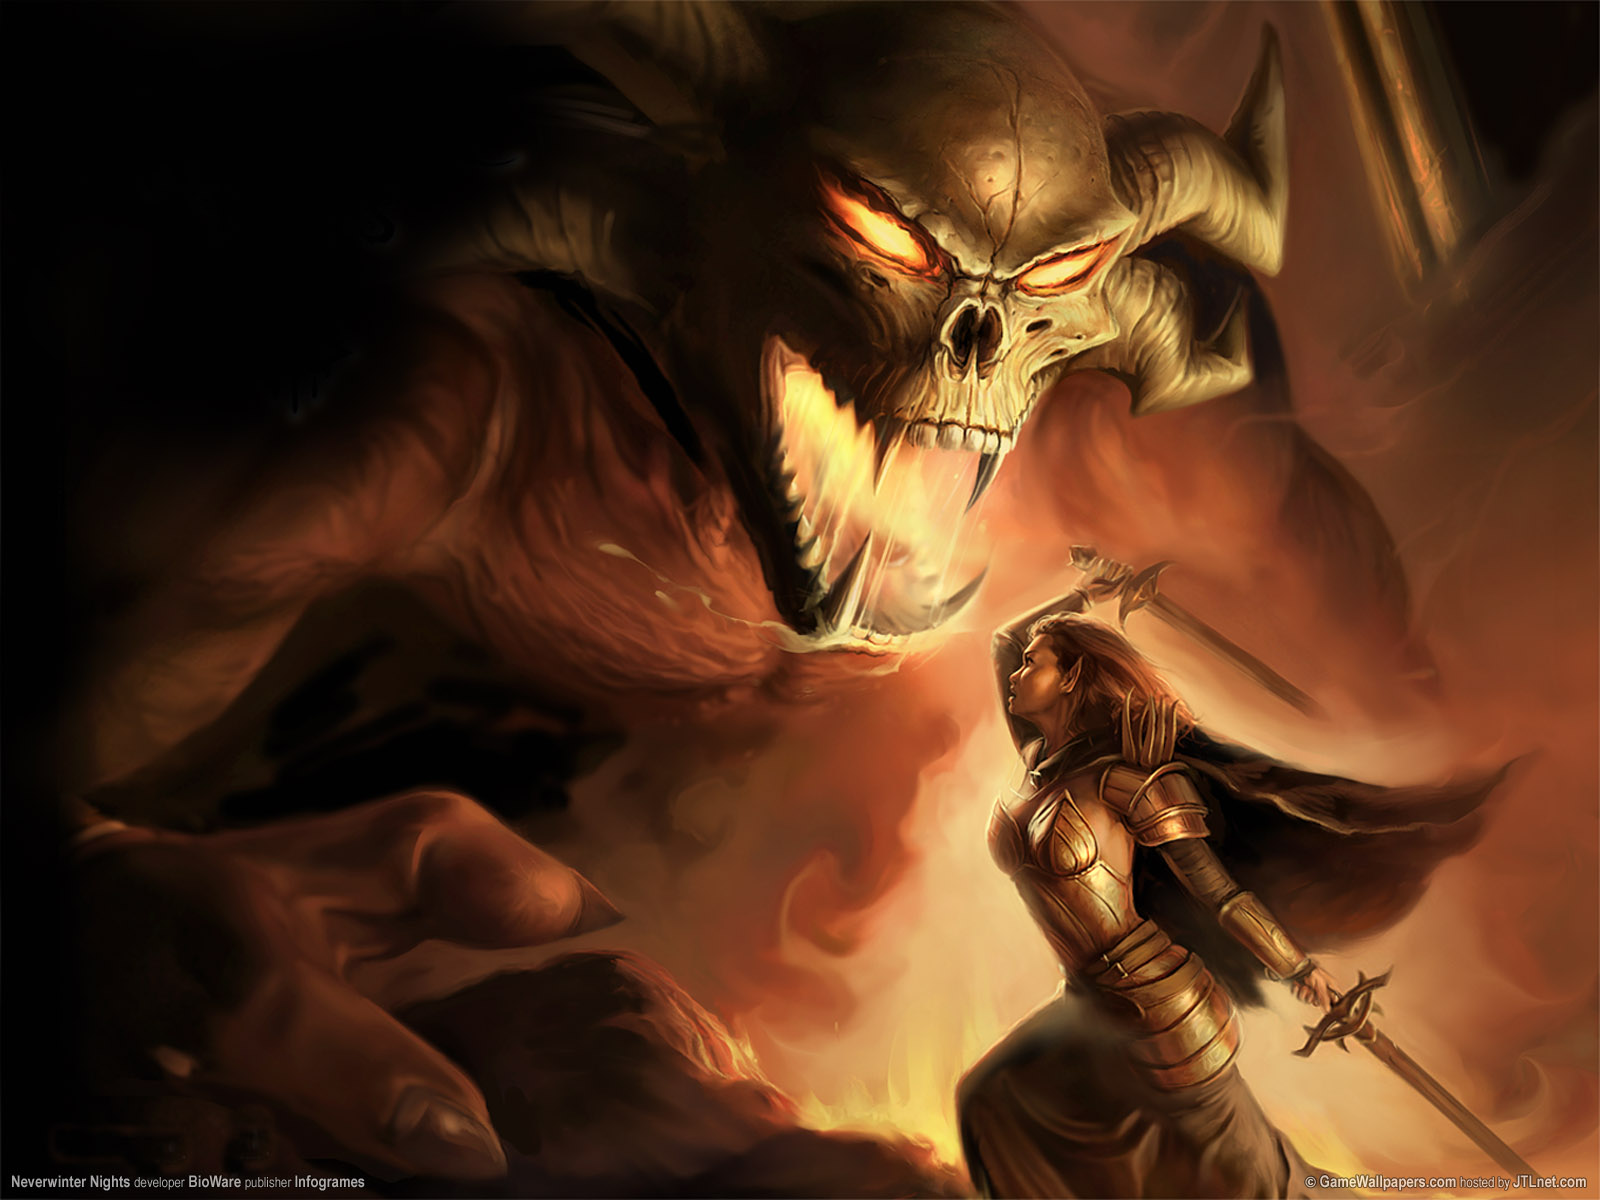 Download High quality Neverwinter Nights wallpaper / Games / 1600x1200